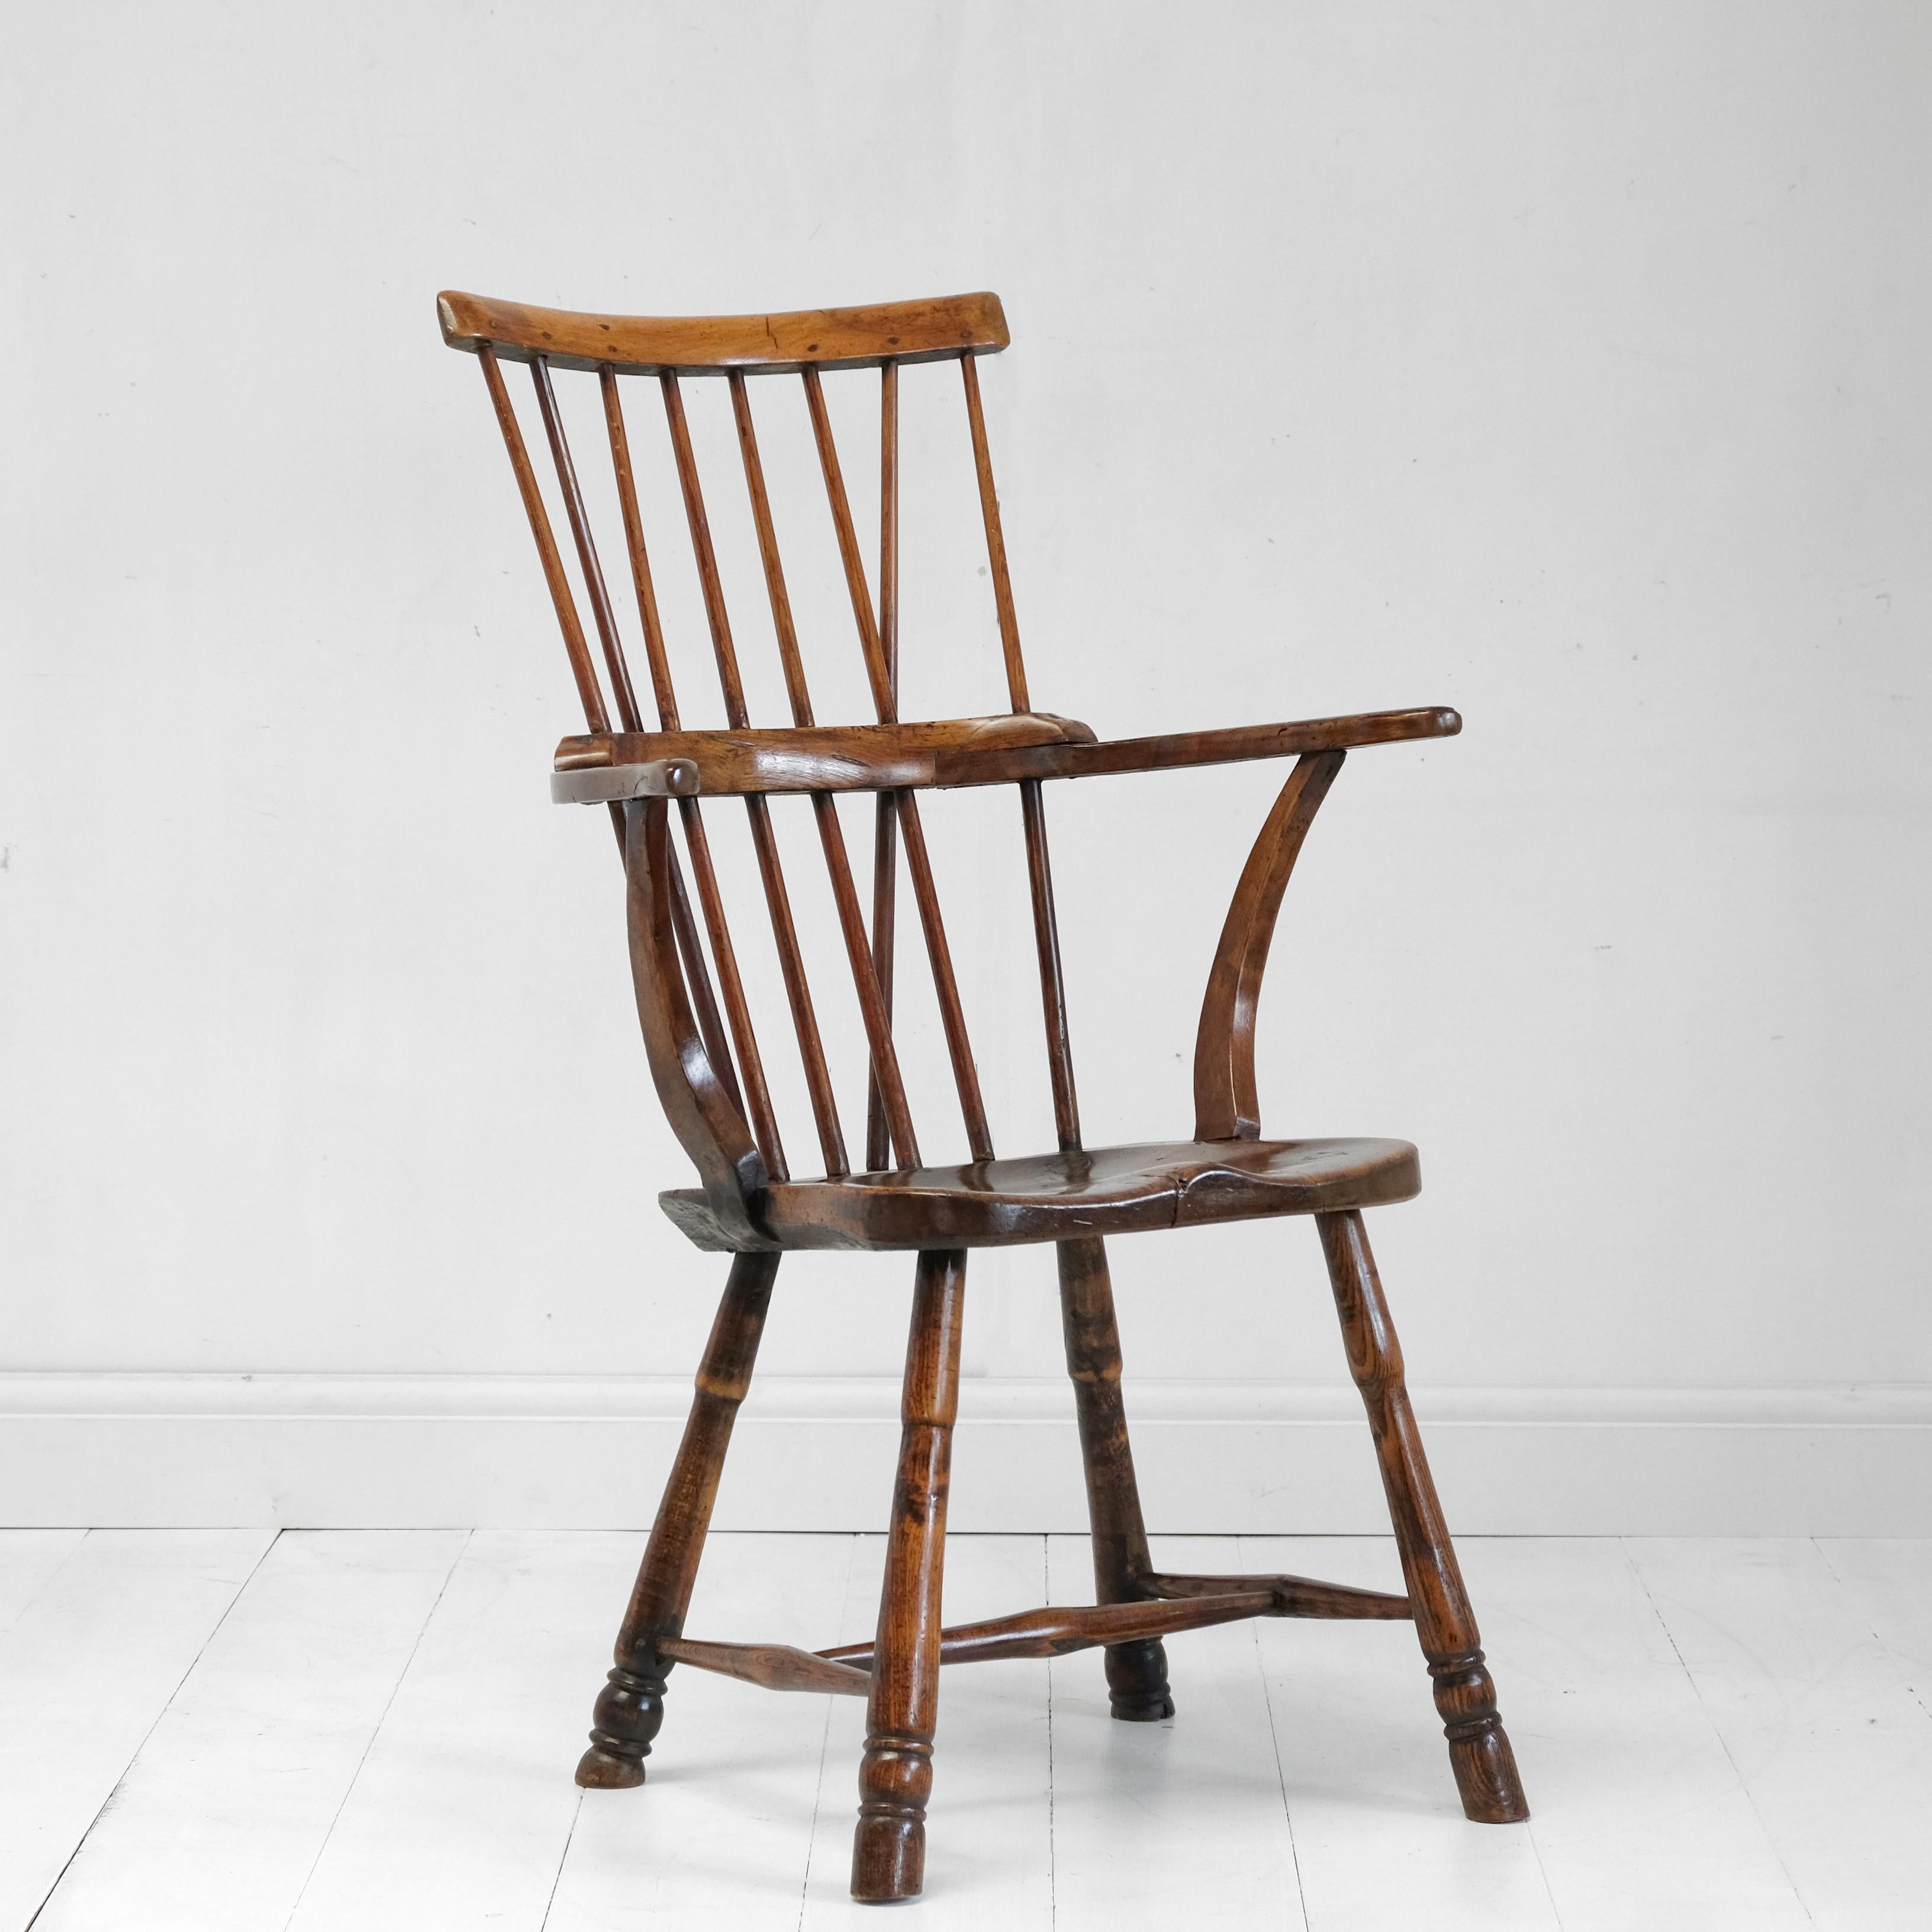 A good comb back Windsor chair. In the style of the famous Oliver Goldsmith chair but with obvious regional variations - this leads me to believe this is a West Country example. Egg and reel turned legs, united by a tapered H stretcher, shaped